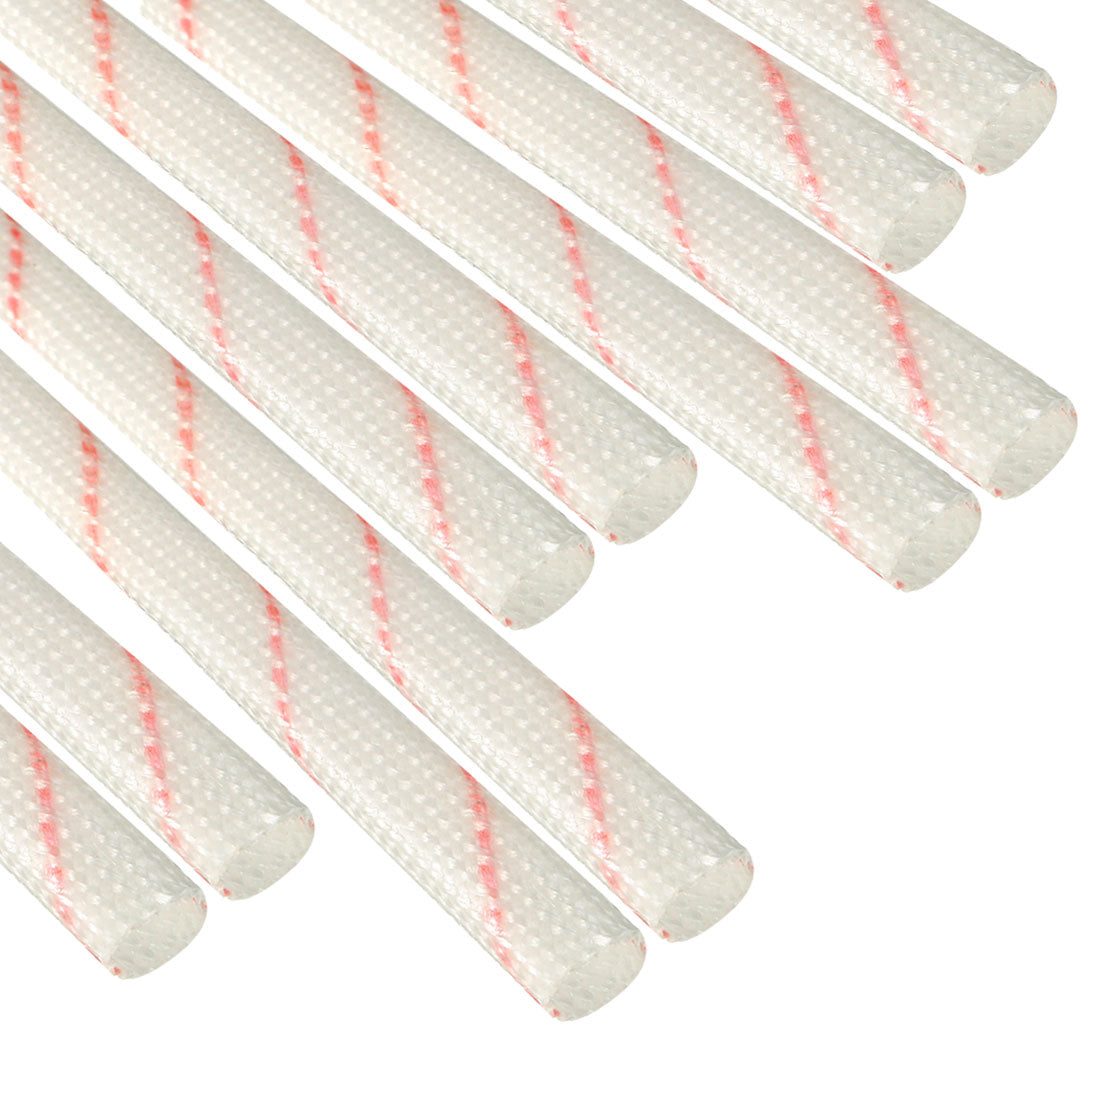 uxcell Uxcell Fiberglass Sleeve 6mm I.D. PVC Insulation Tubing 1500V Tube Adjustable Sleeving Pipe 125 Degree Centigrade Cable Wrap Wire 900mm 2.95ft 10pcs